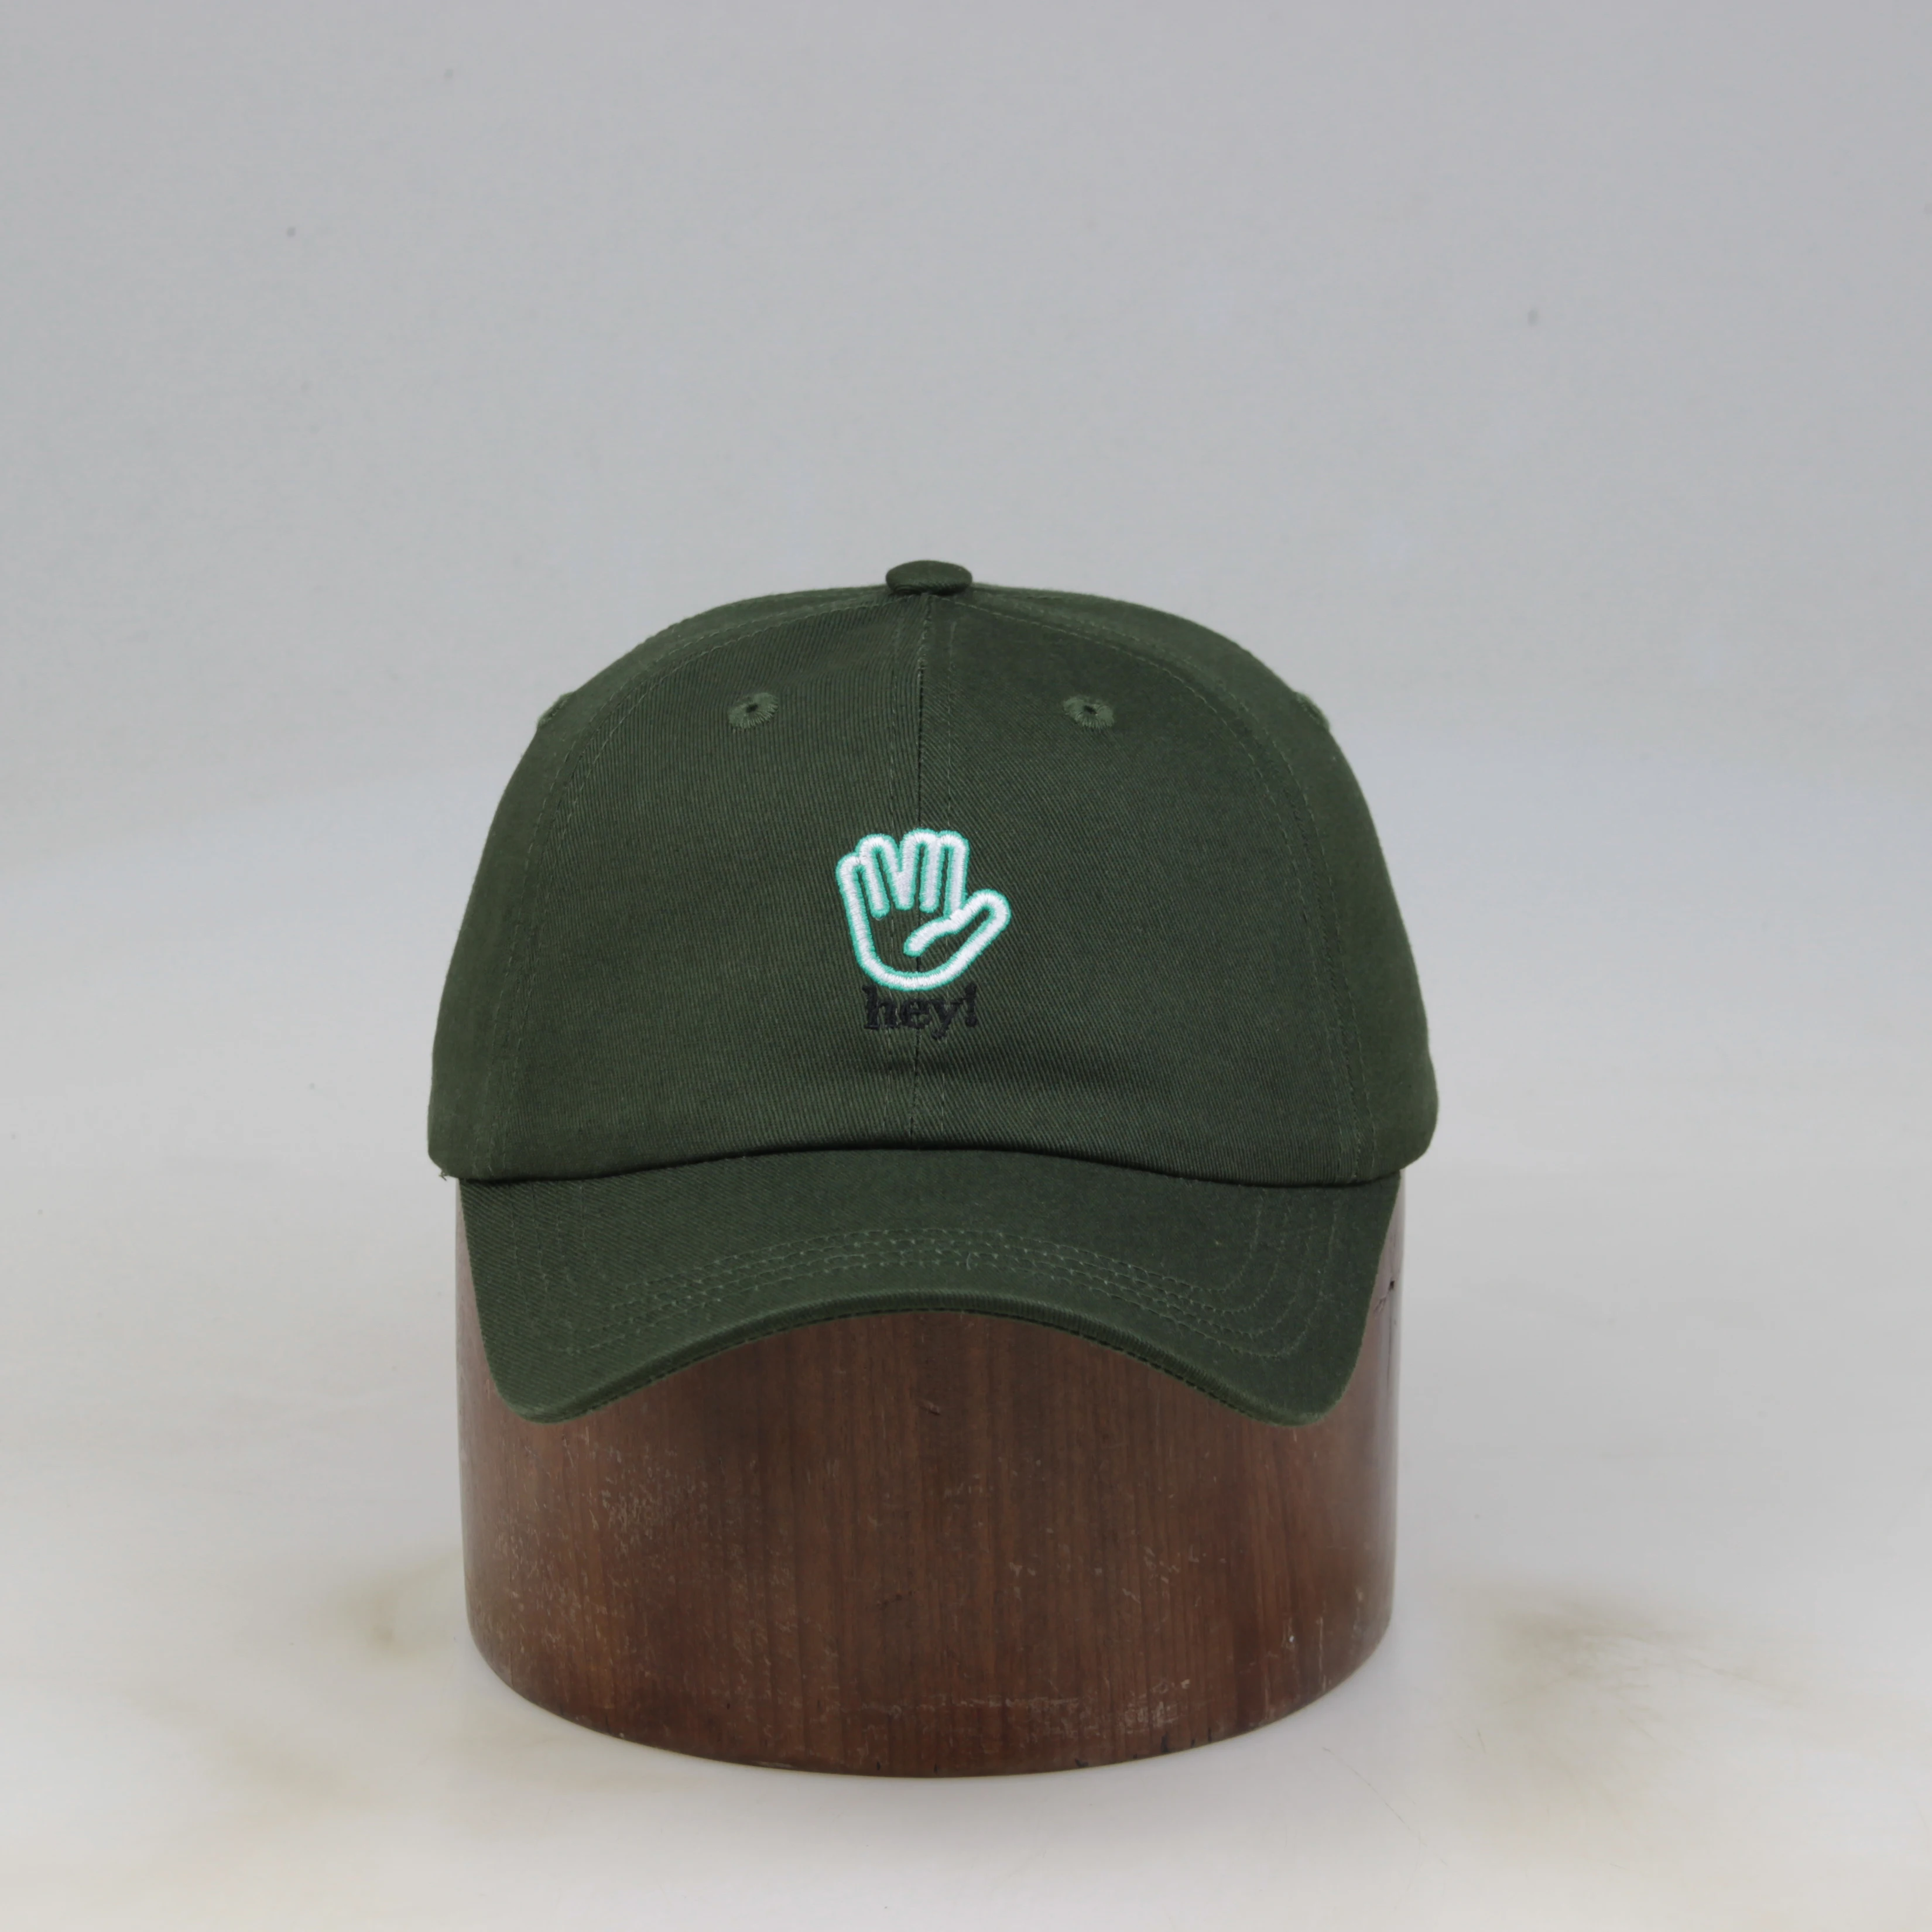 

High Quality Embroidery Dad Baseball Cap Hat 5-Panel Men Adult Sport Cap Stock Wholesale Fashion Plain Gift, Green